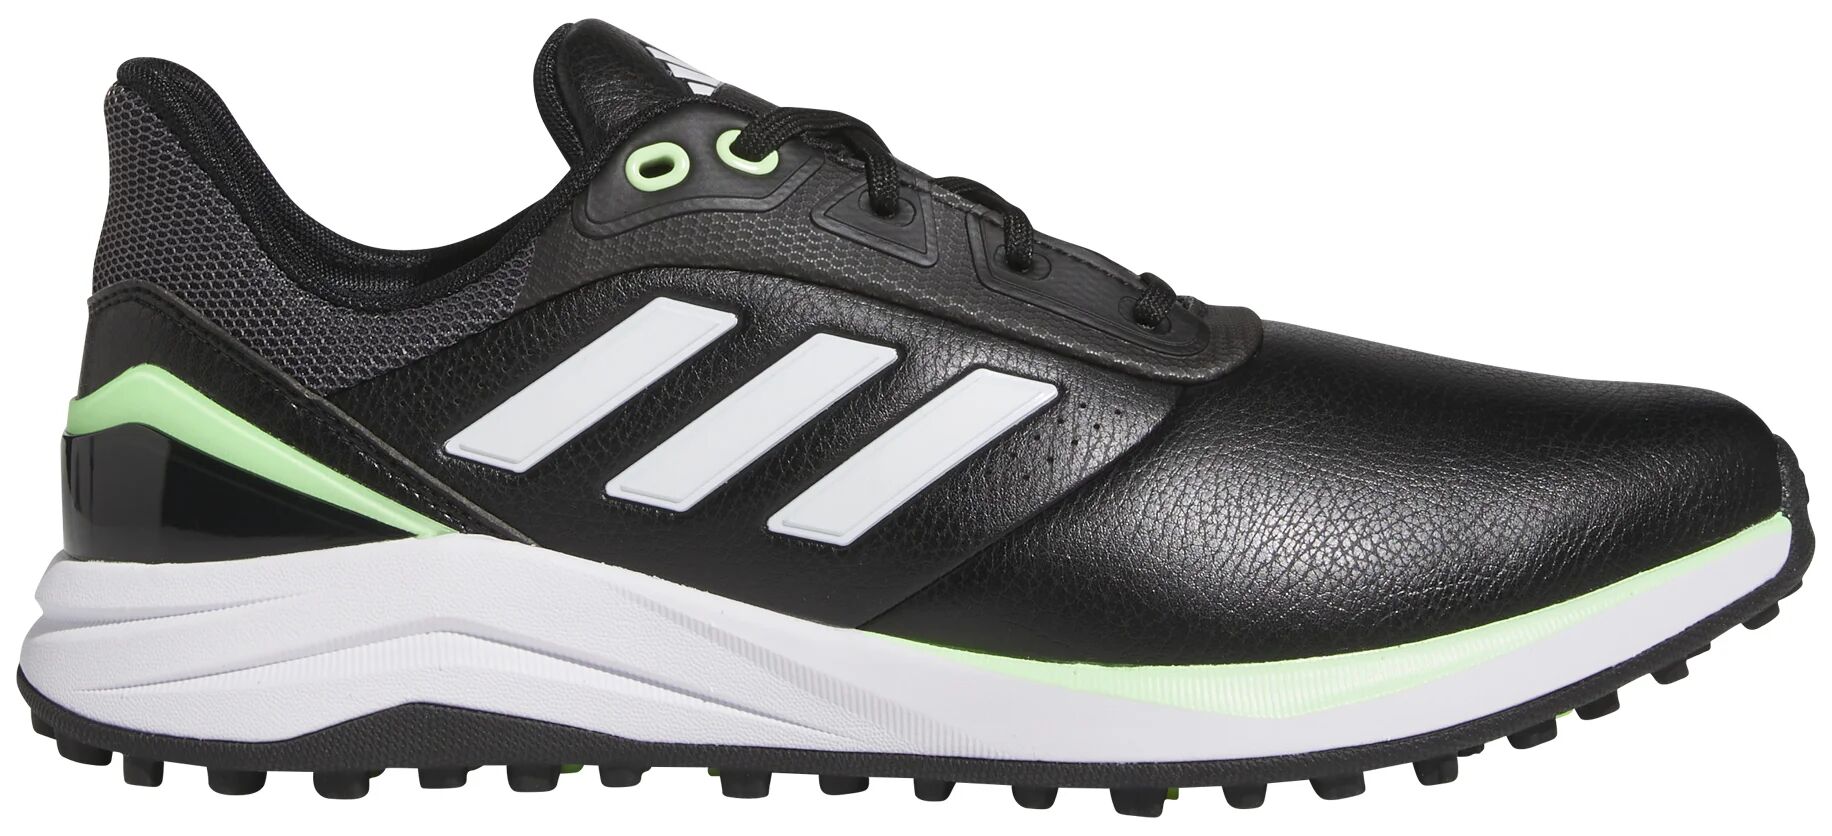 adidas Solarmotion Spikeless 24 Golf Shoes - Core Black/Cloud White/Green Spark - 9.5 - WIDE